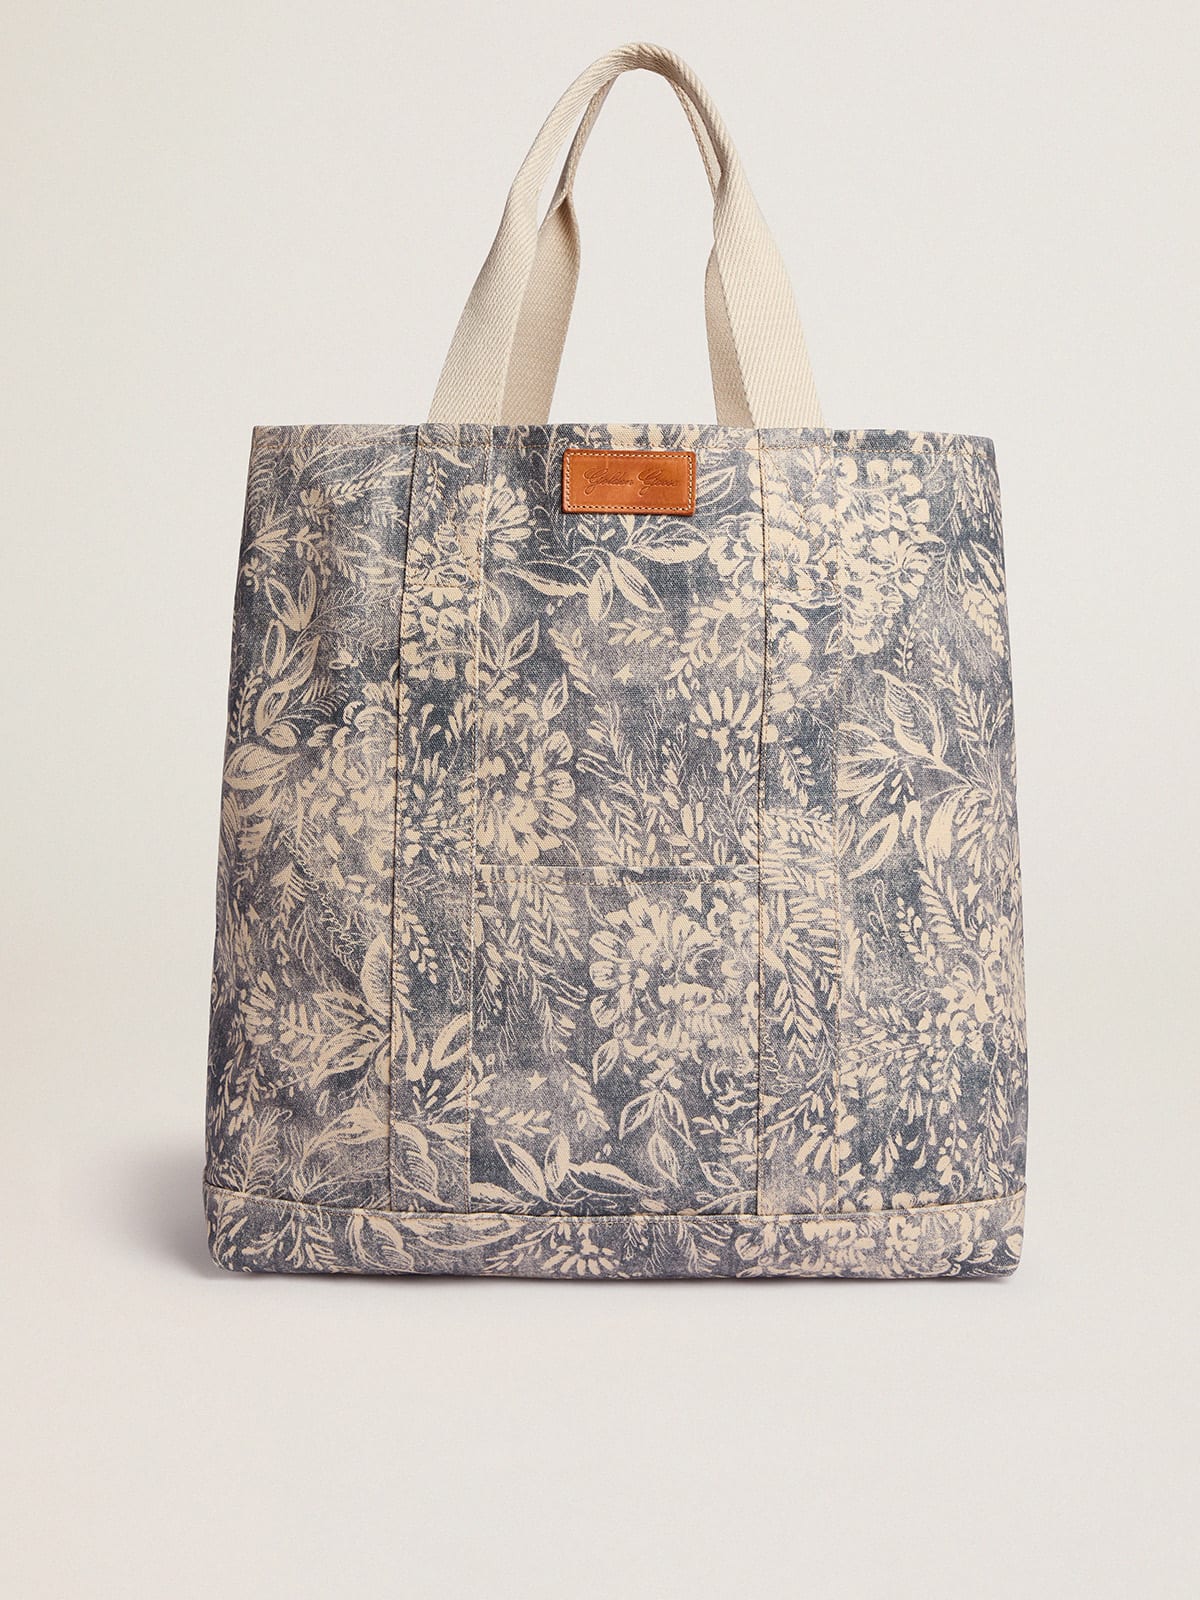 Golden Resort Capsule Collection canvas Ocean bag in vintage blue with contrasting white toile de jouy print